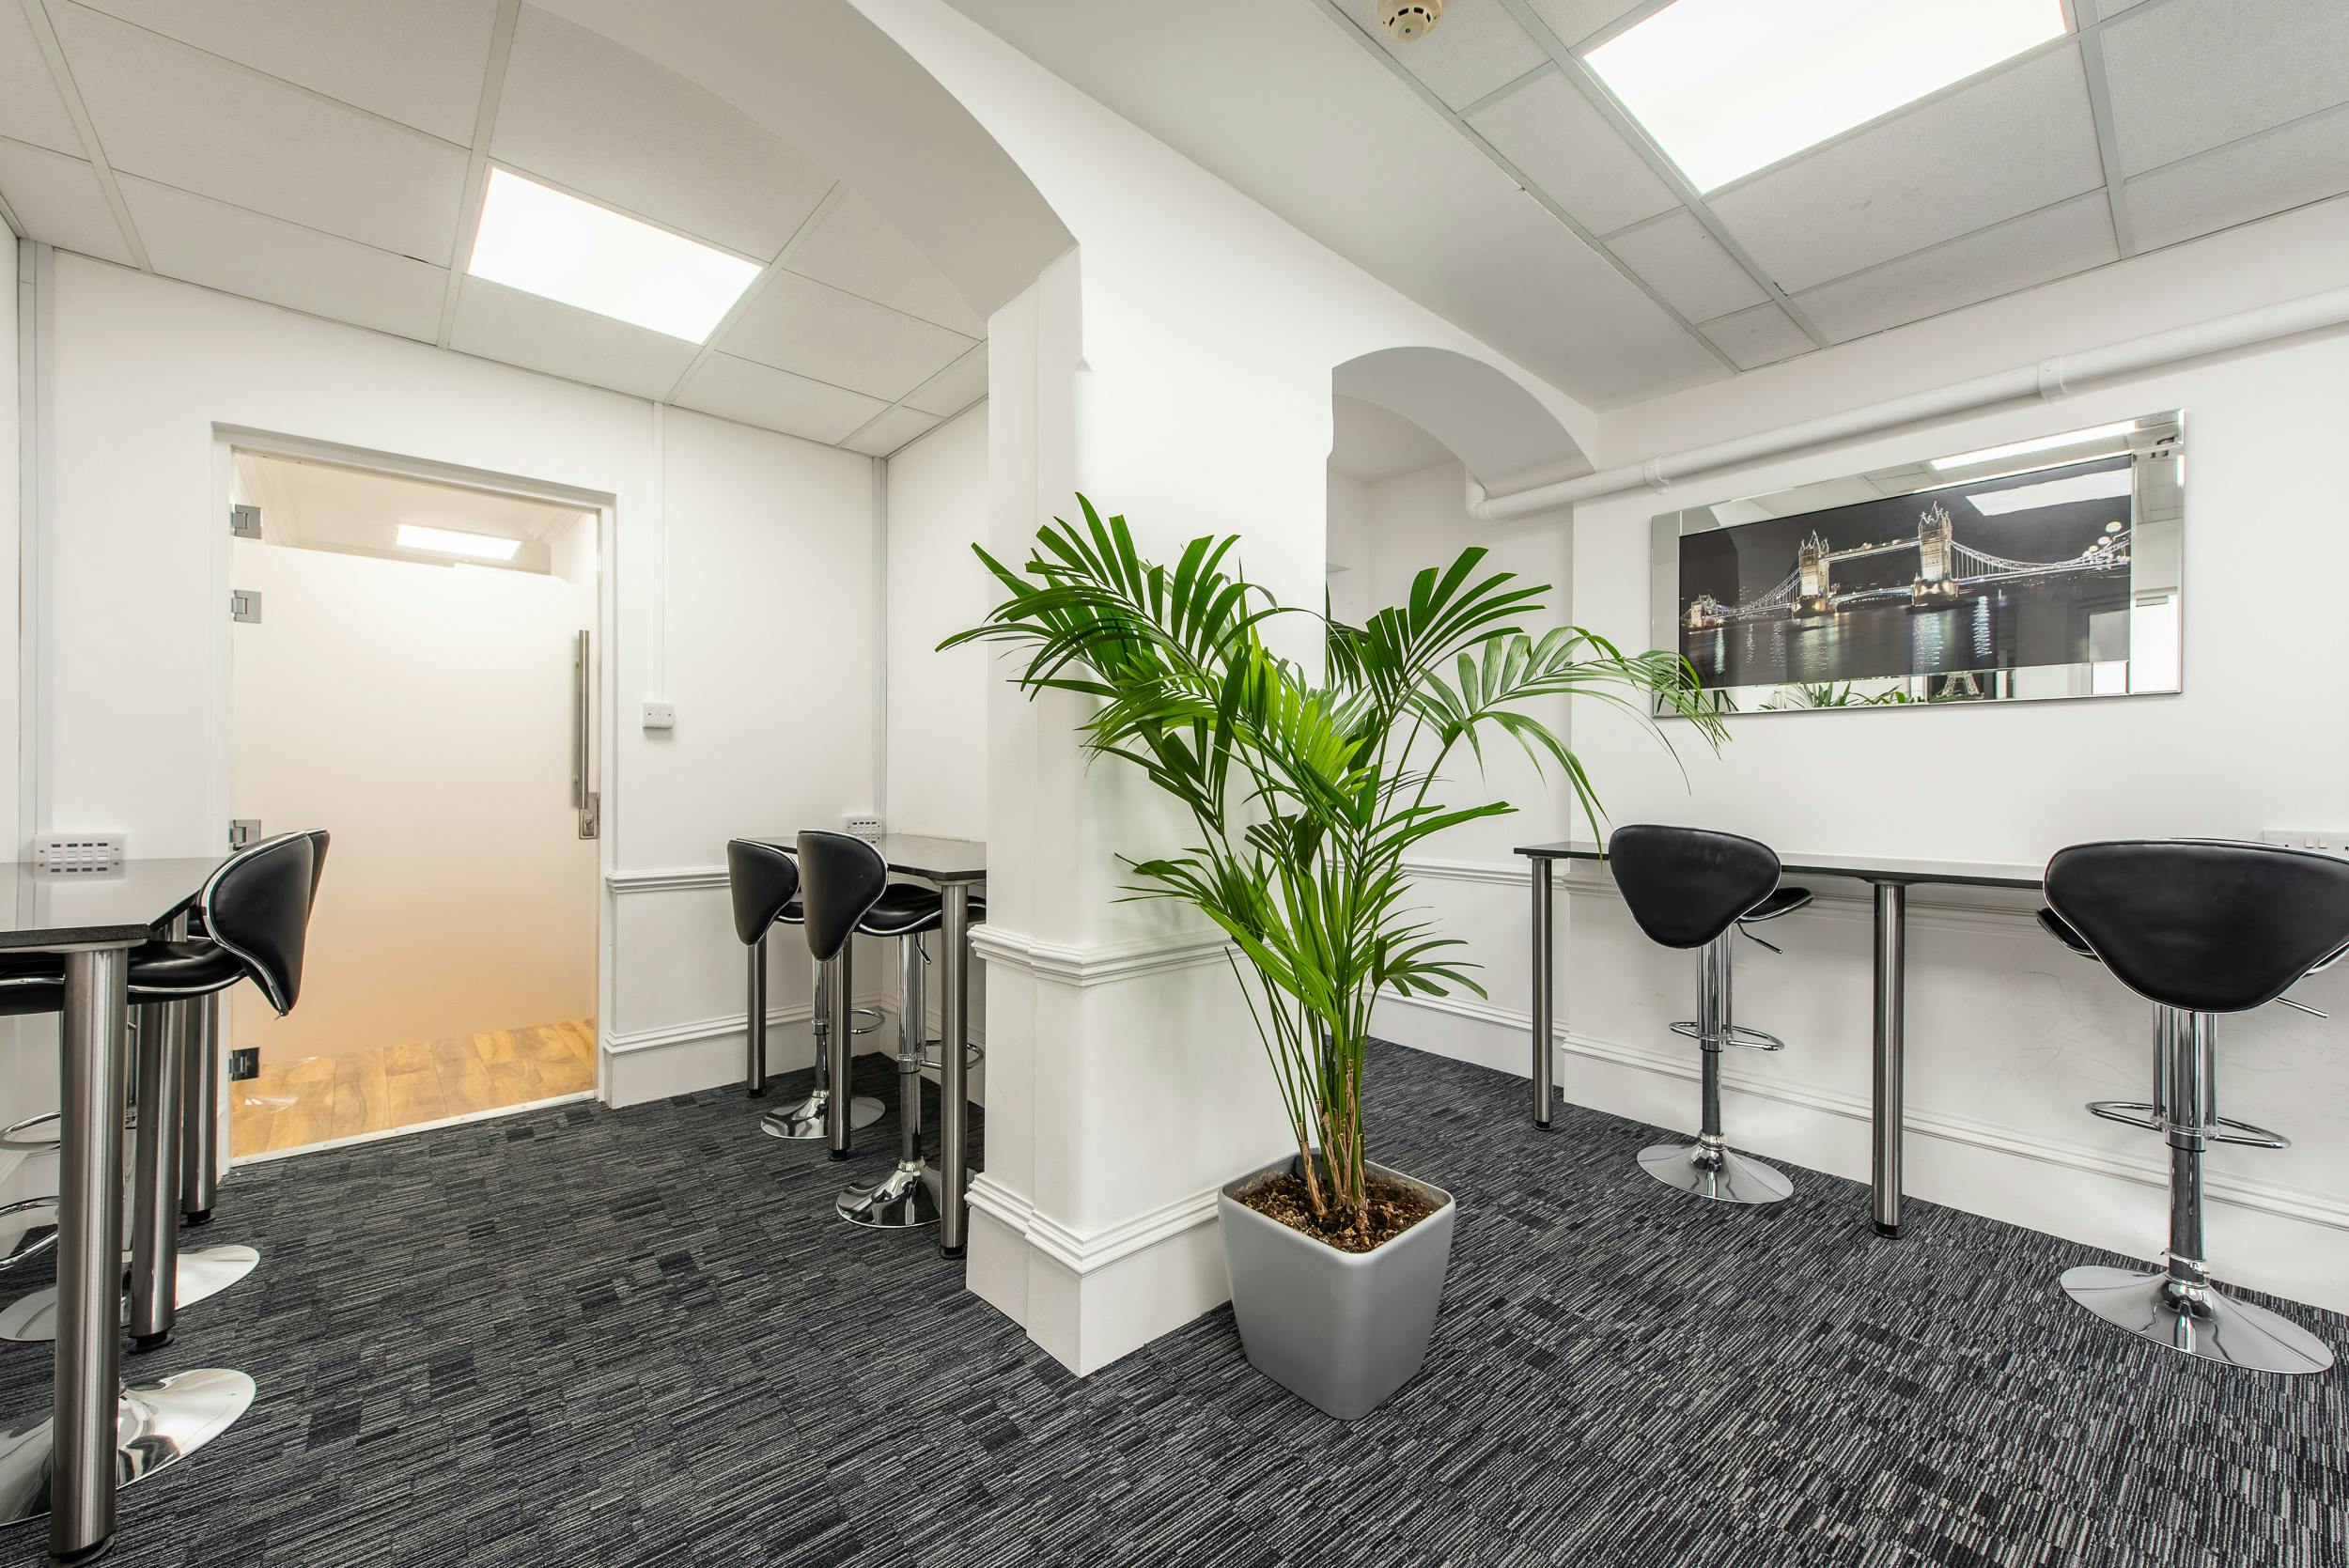 Holborn – 20 Person Office + Private Meeting Room – Lincolns Inn Fields